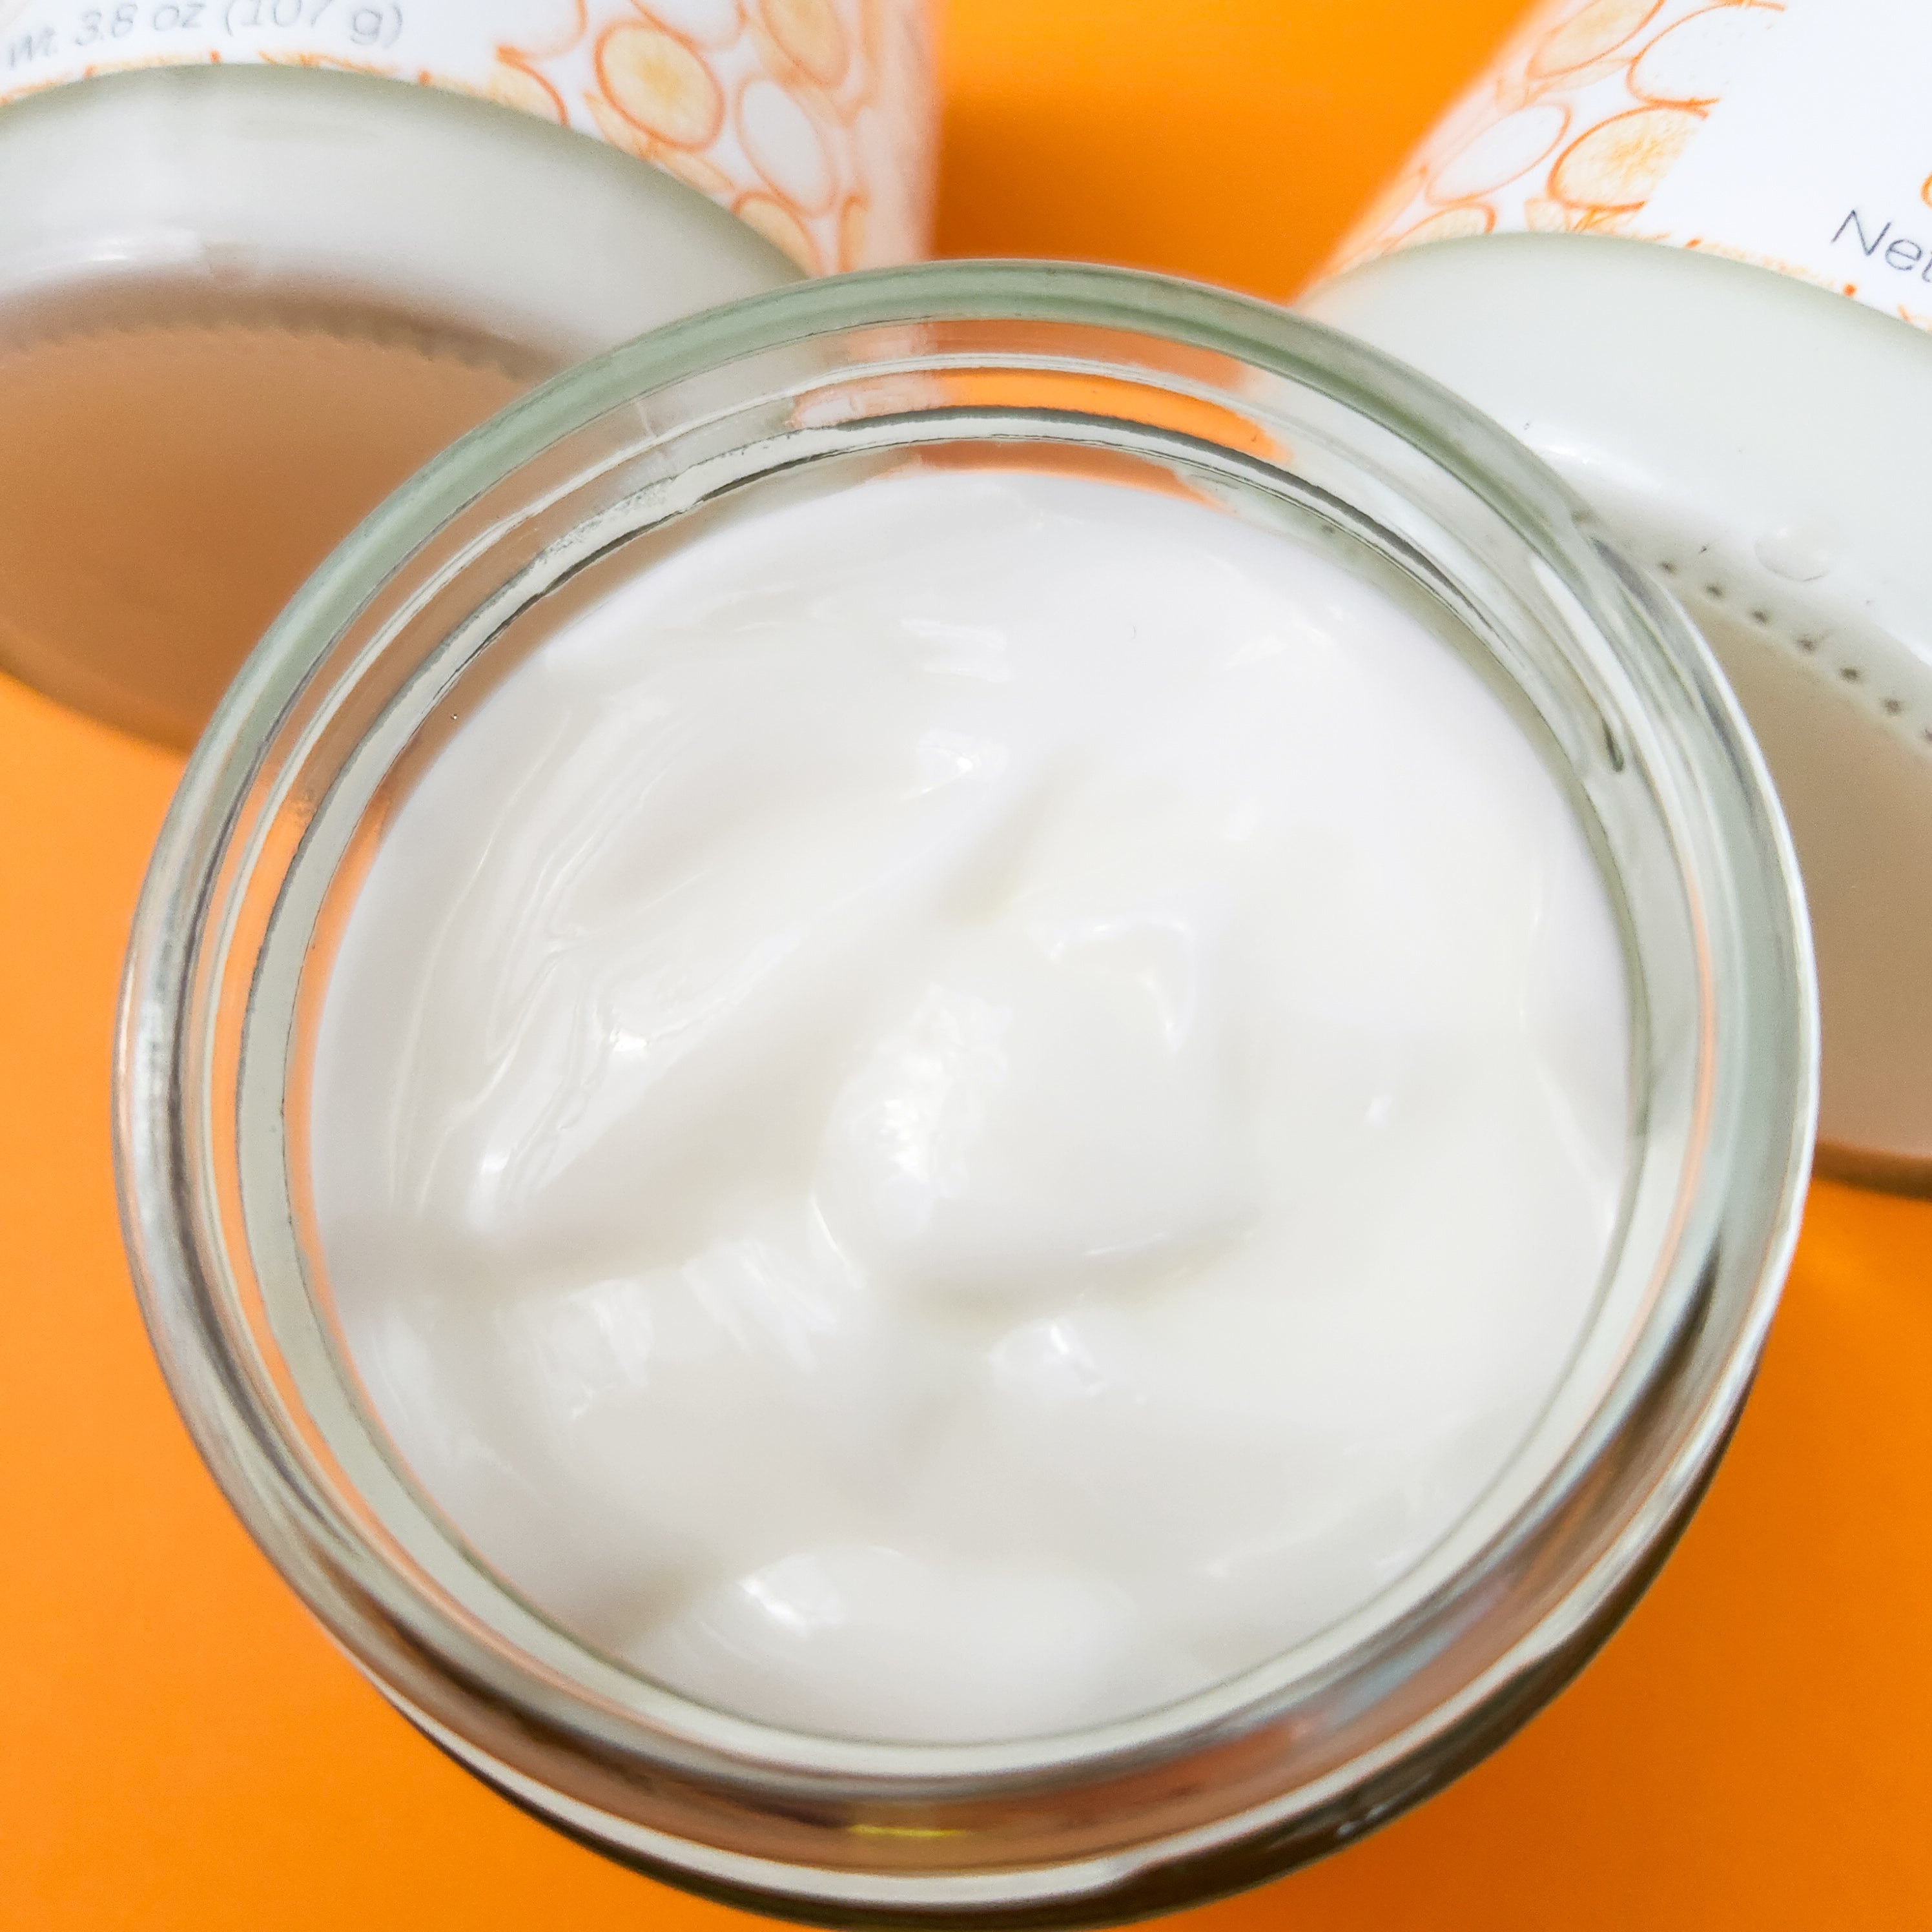 A closeup of an open jar of Citrus Bliss Body Lotion, showcasing the white lotion inside. Orange background.